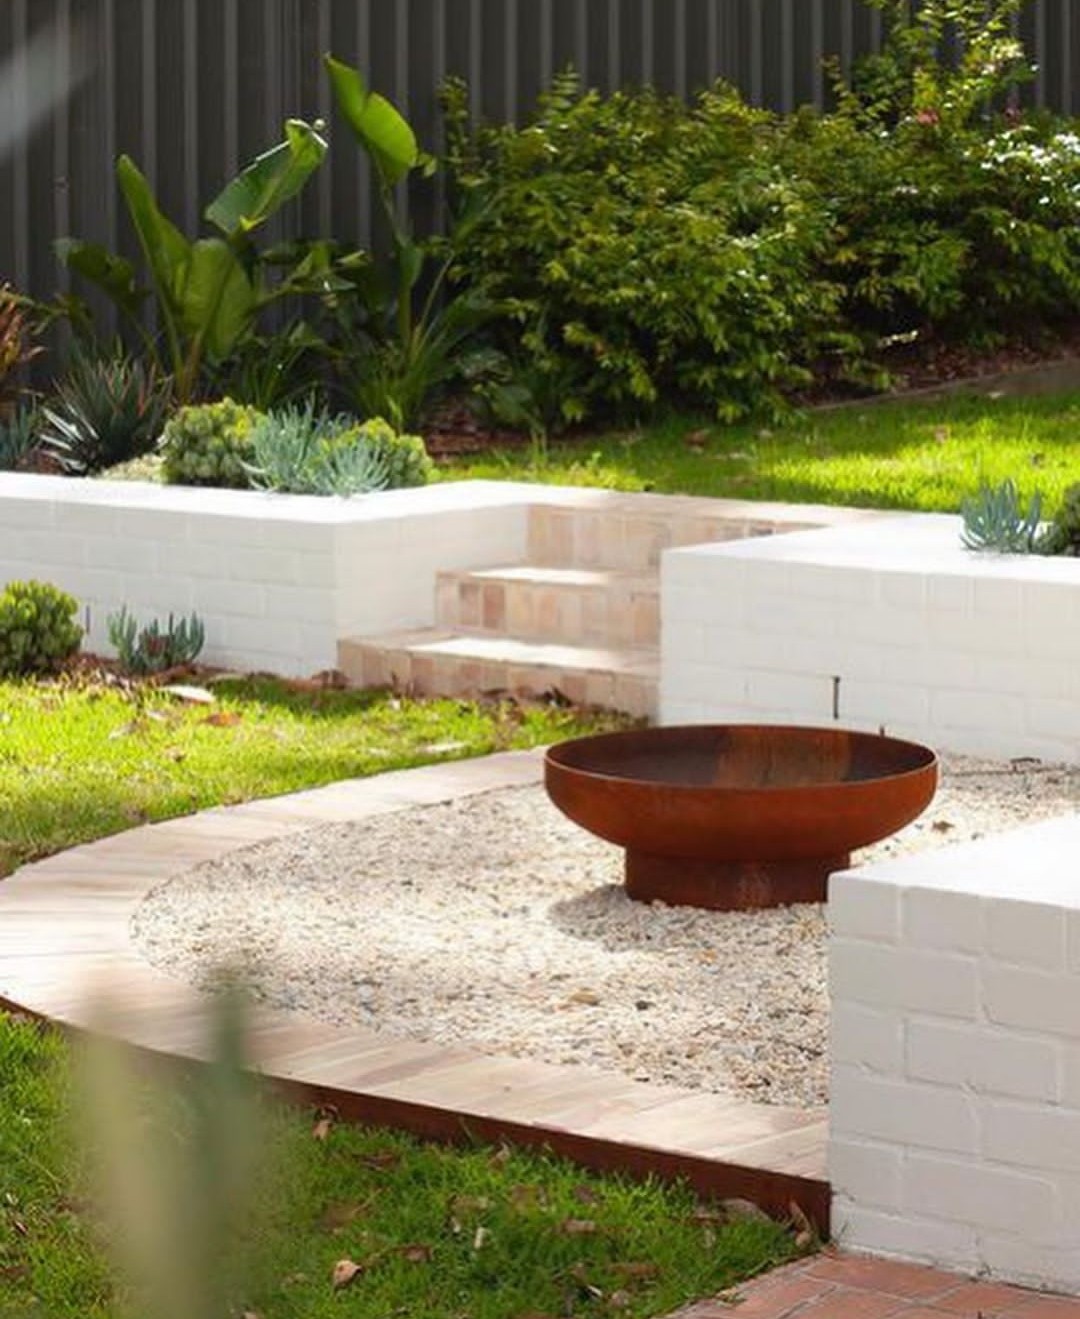 Rusty firepit with white painted brick wall